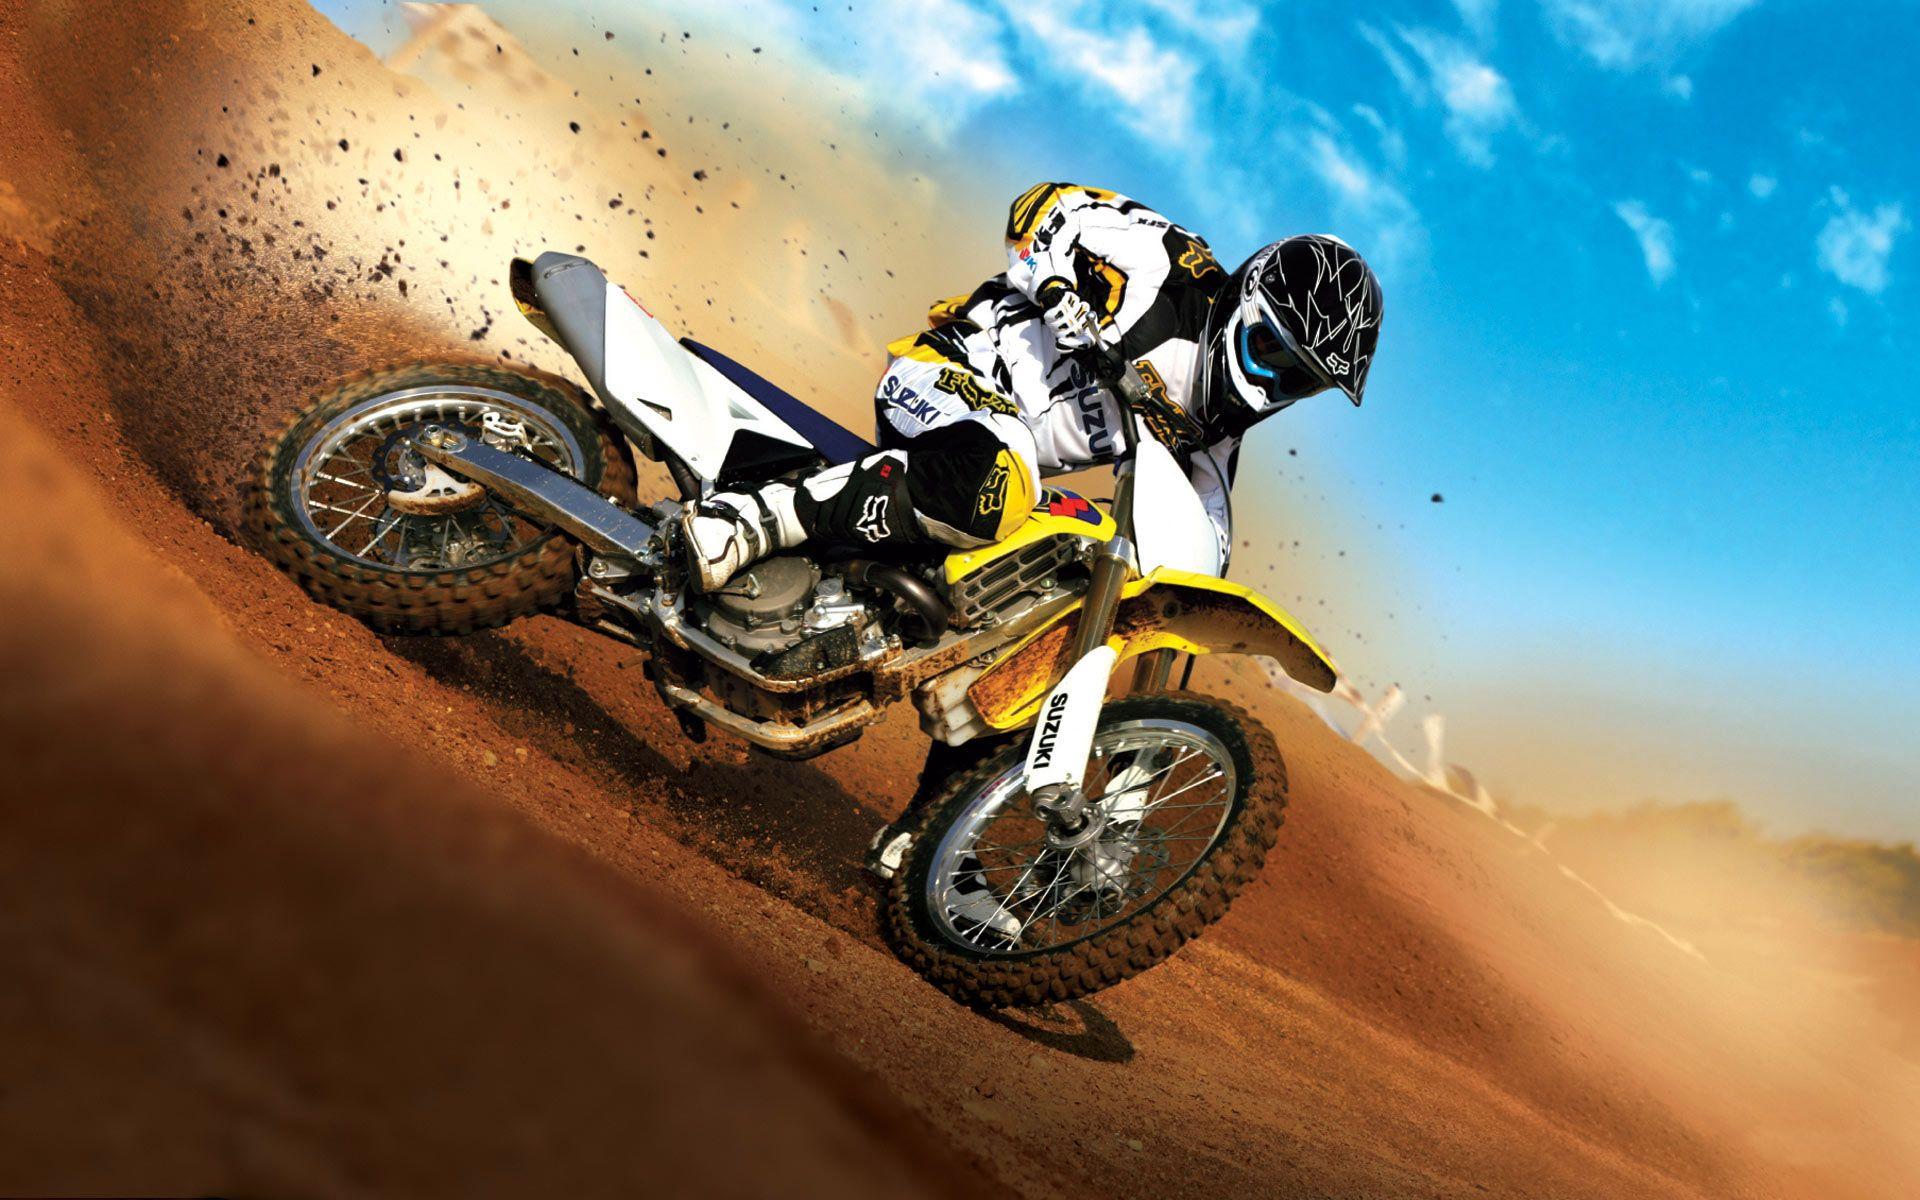 Racing Bike Wallpaper Hd For Android